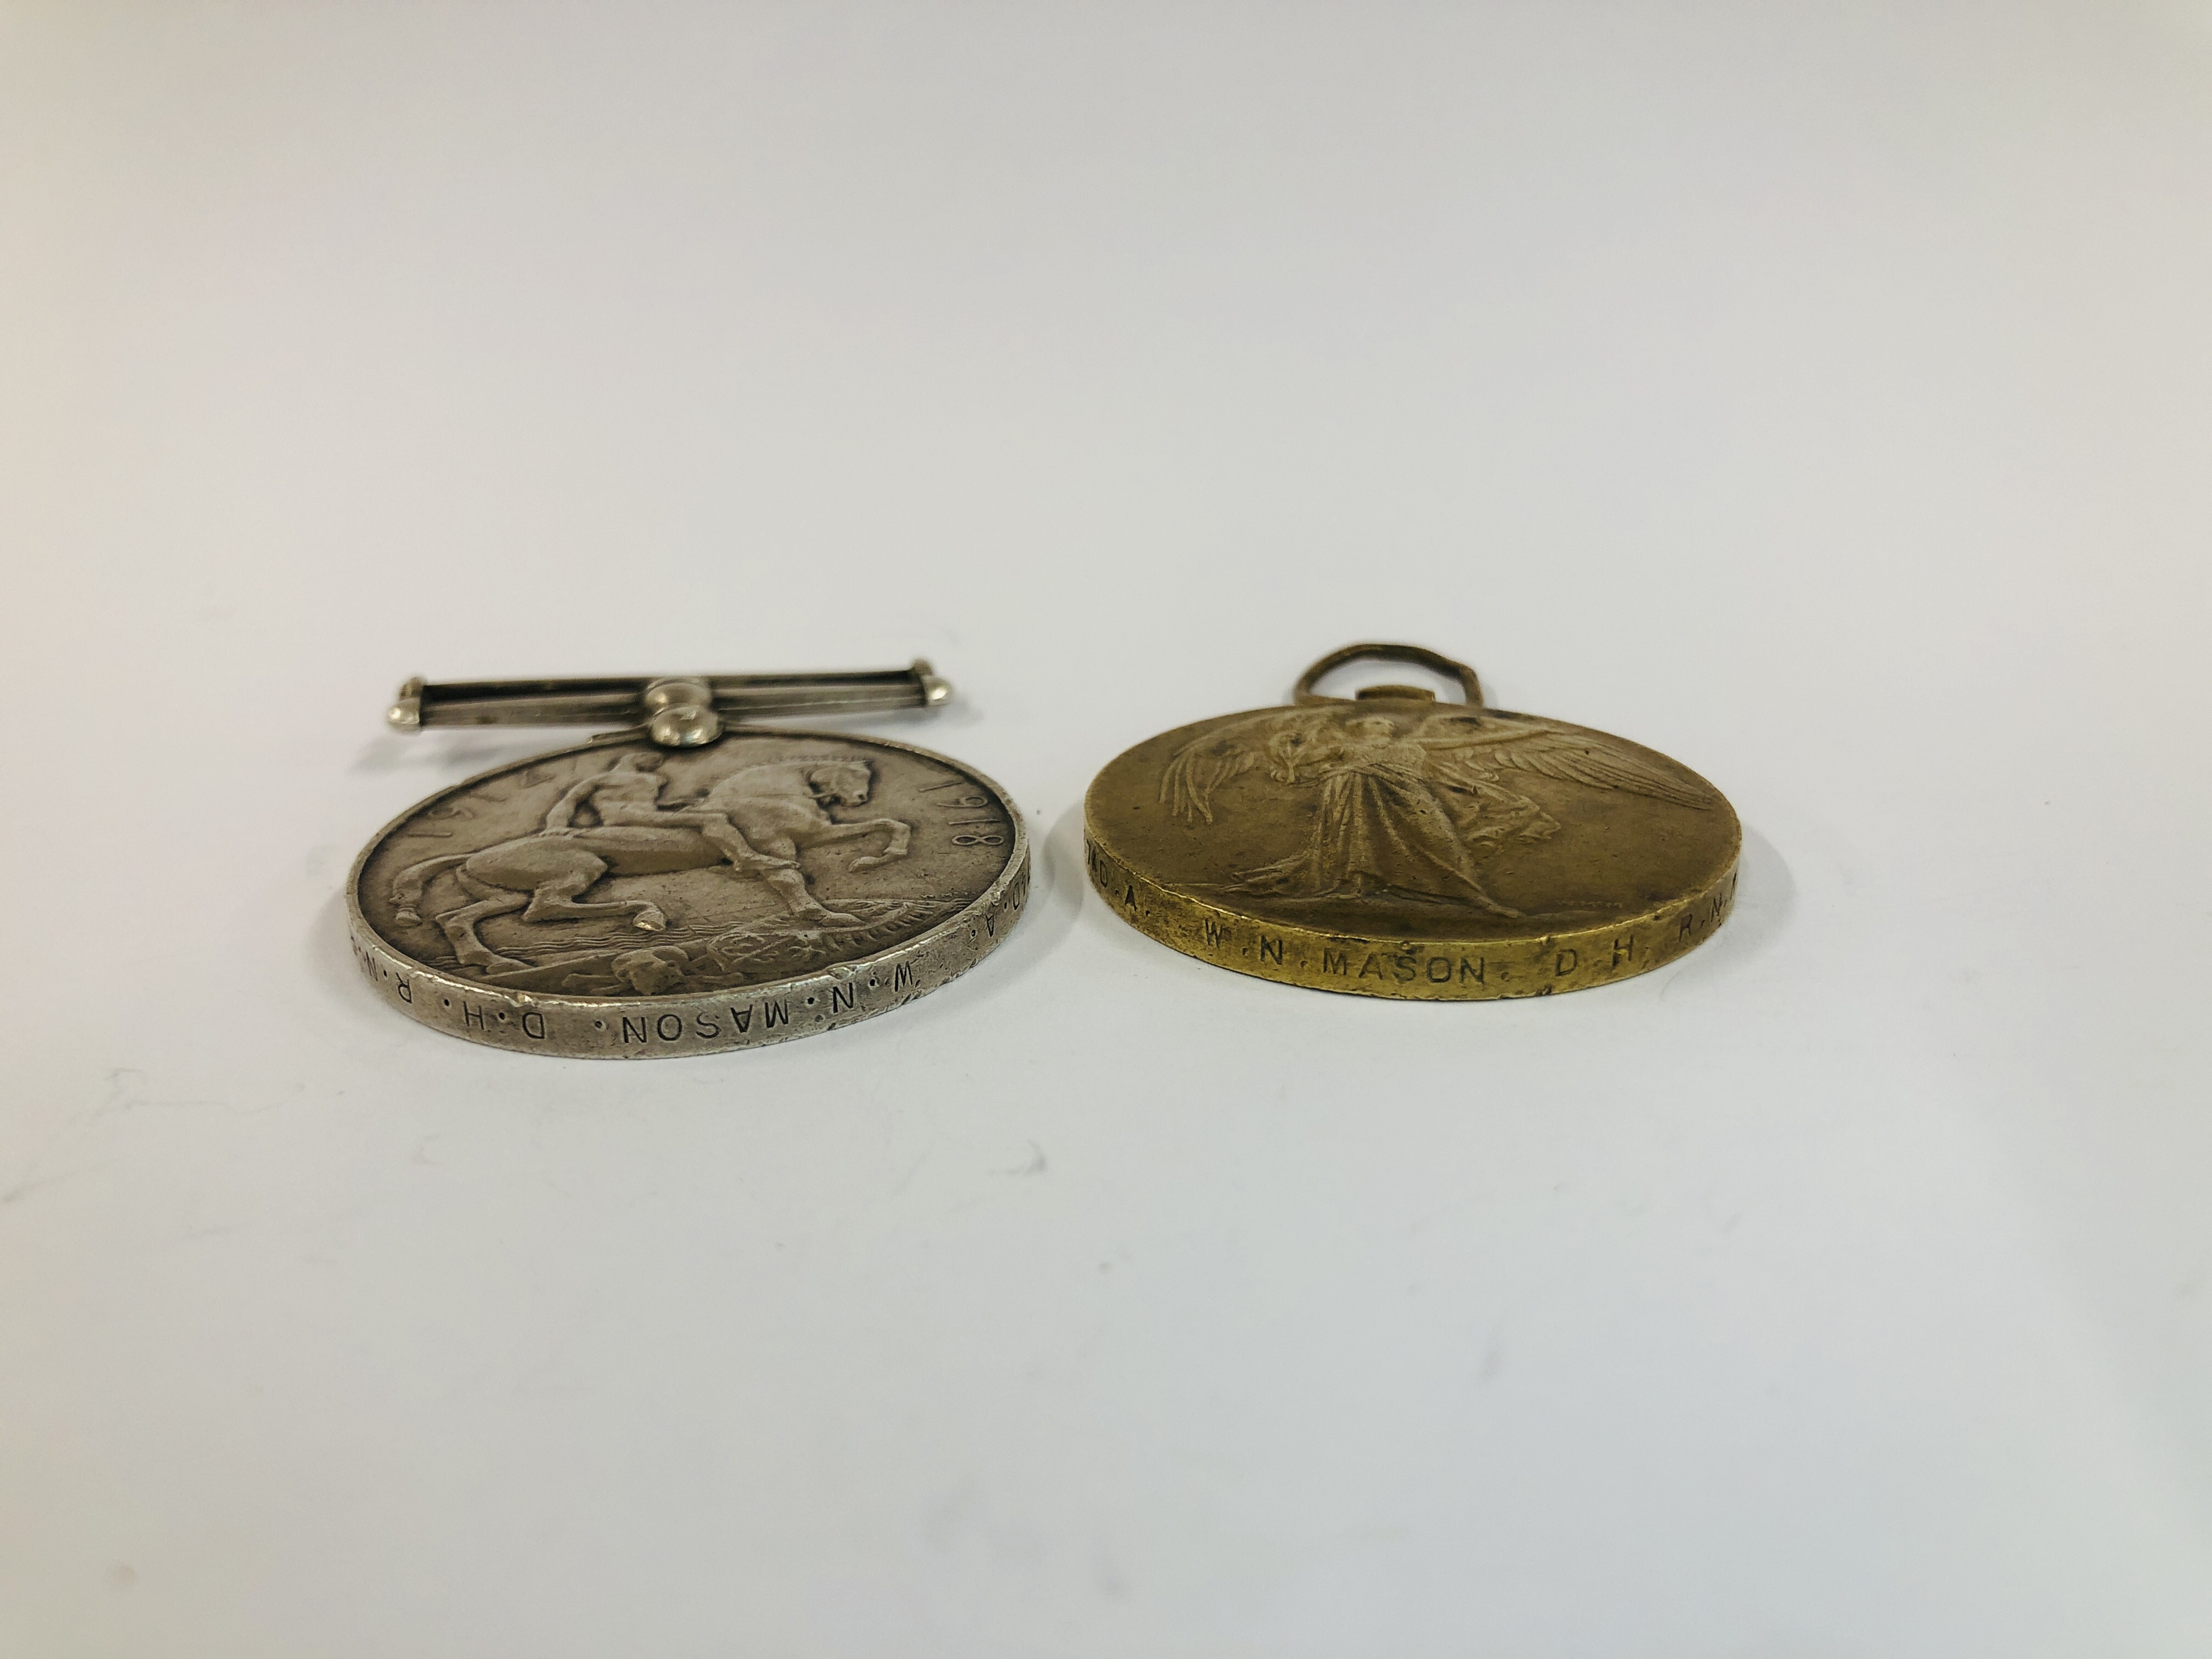 2 MEDALS FROM WW1 1914-1919 & 1914-1918 "THE GREAT WAR FOR CIVILISATION" PRESENTED TO W.N. MASON D. - Image 4 of 5